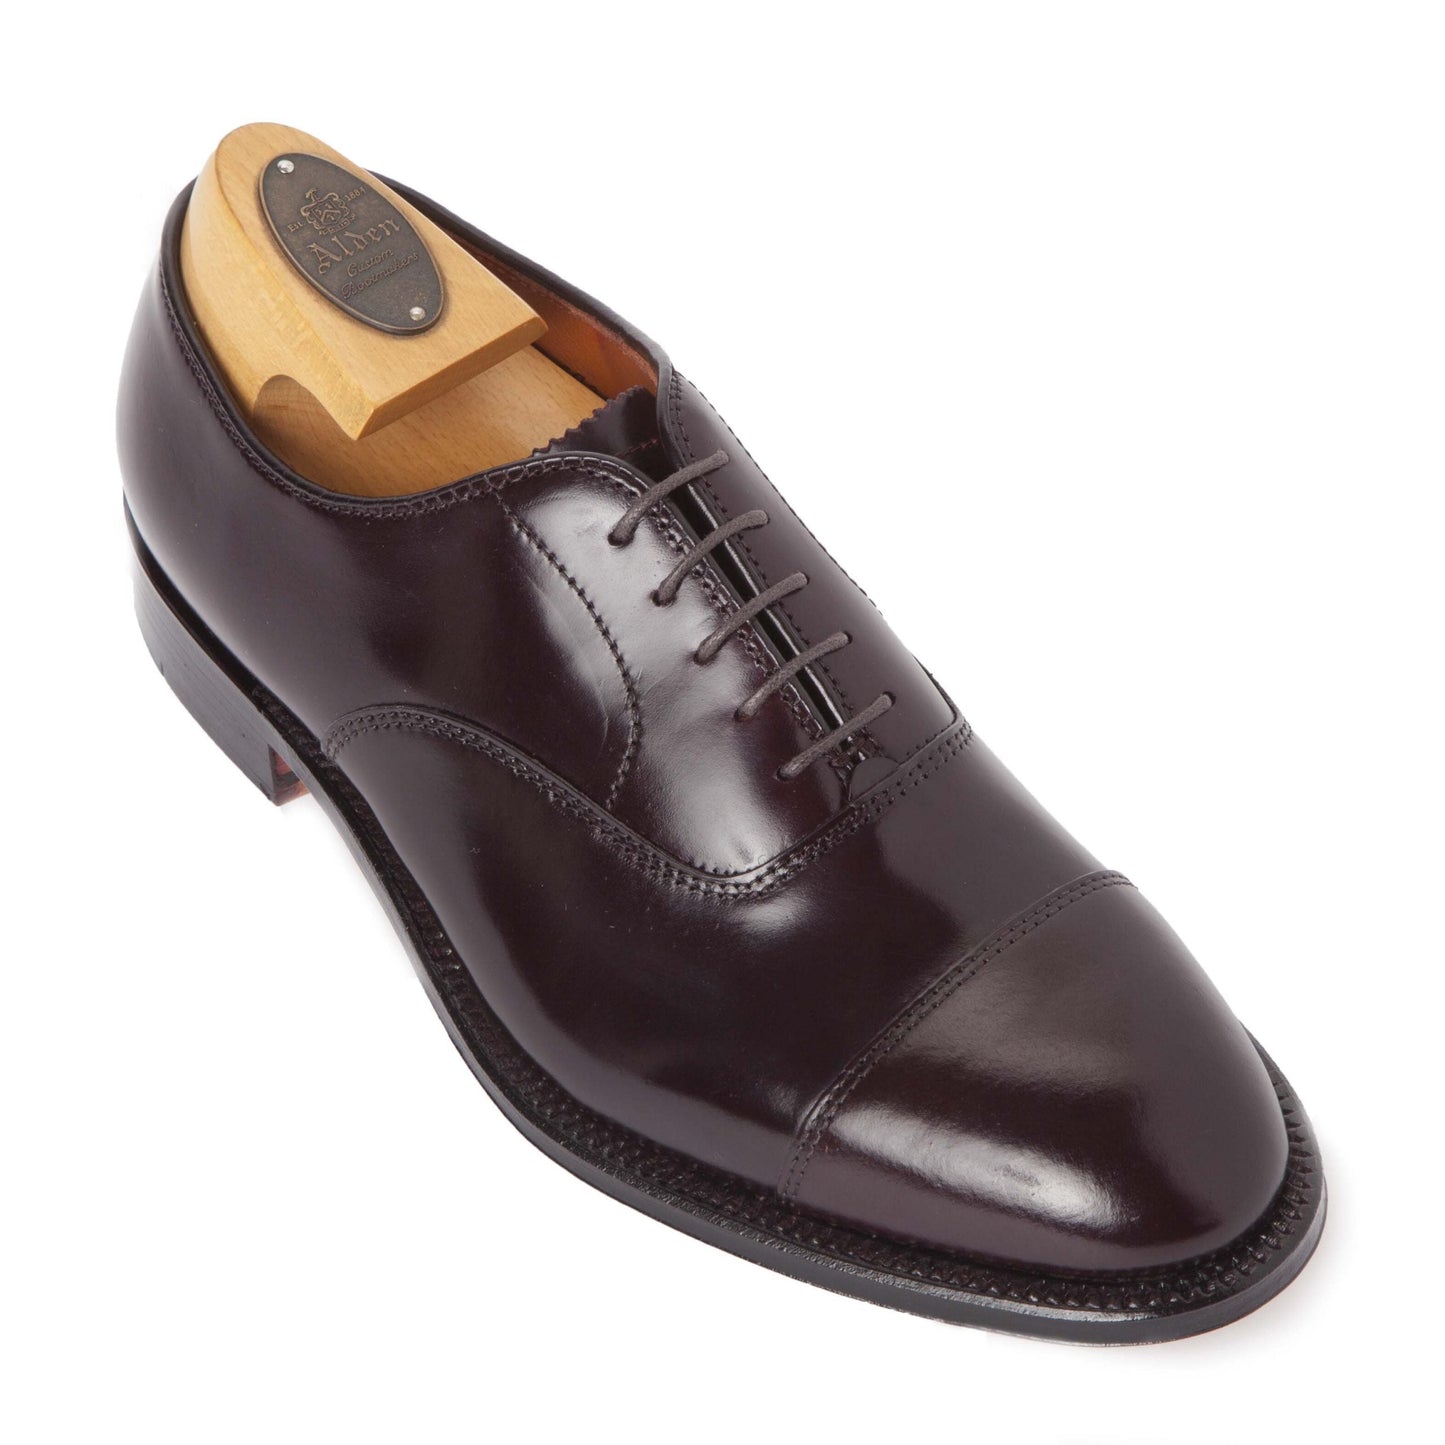 9070 - Straight Tip Bal in Color 8 Shell Cordovan